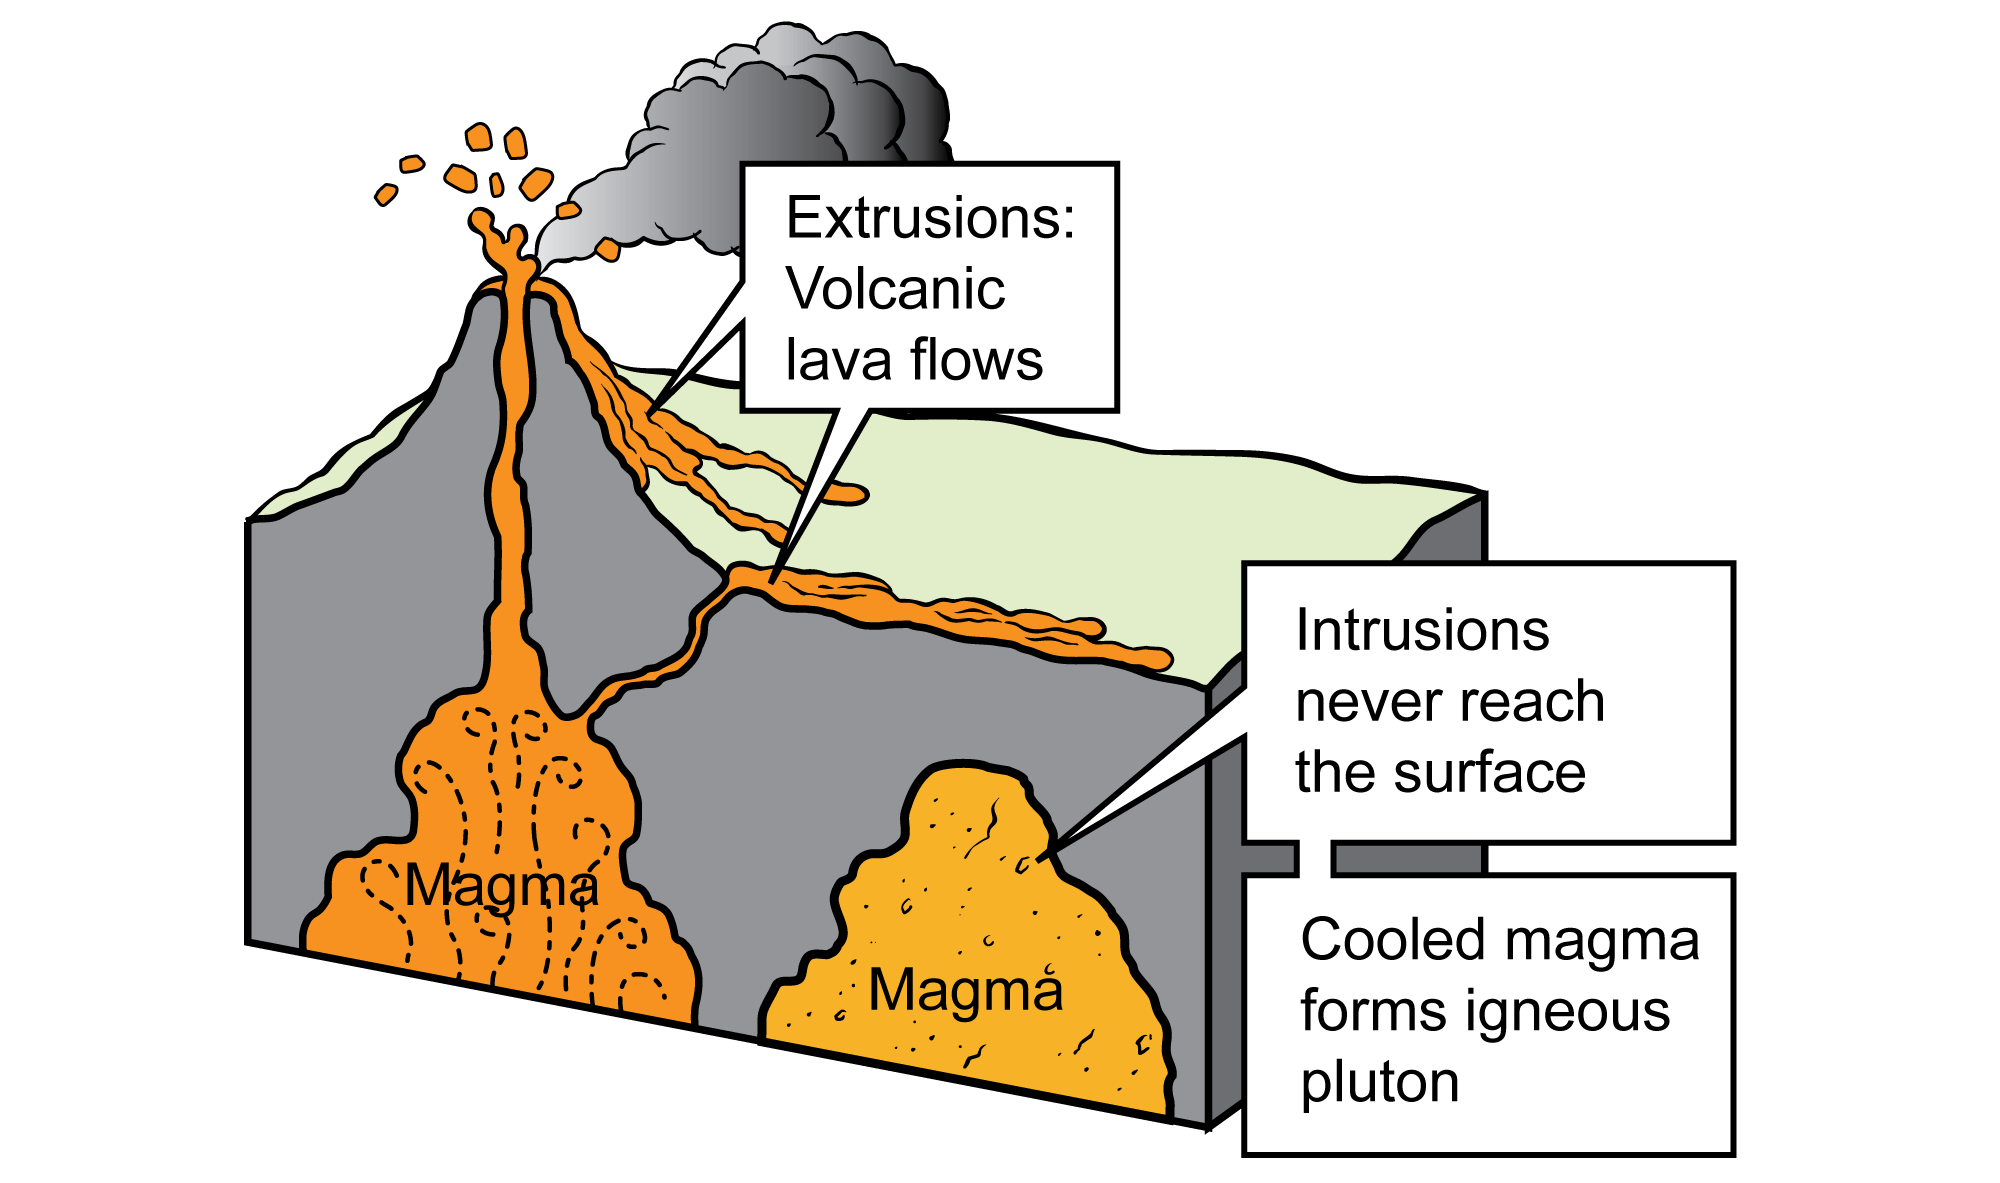 Diagram comparing magma that erupts as a volcano (extrusive) versus magma that cools below the surface to form a pluton.